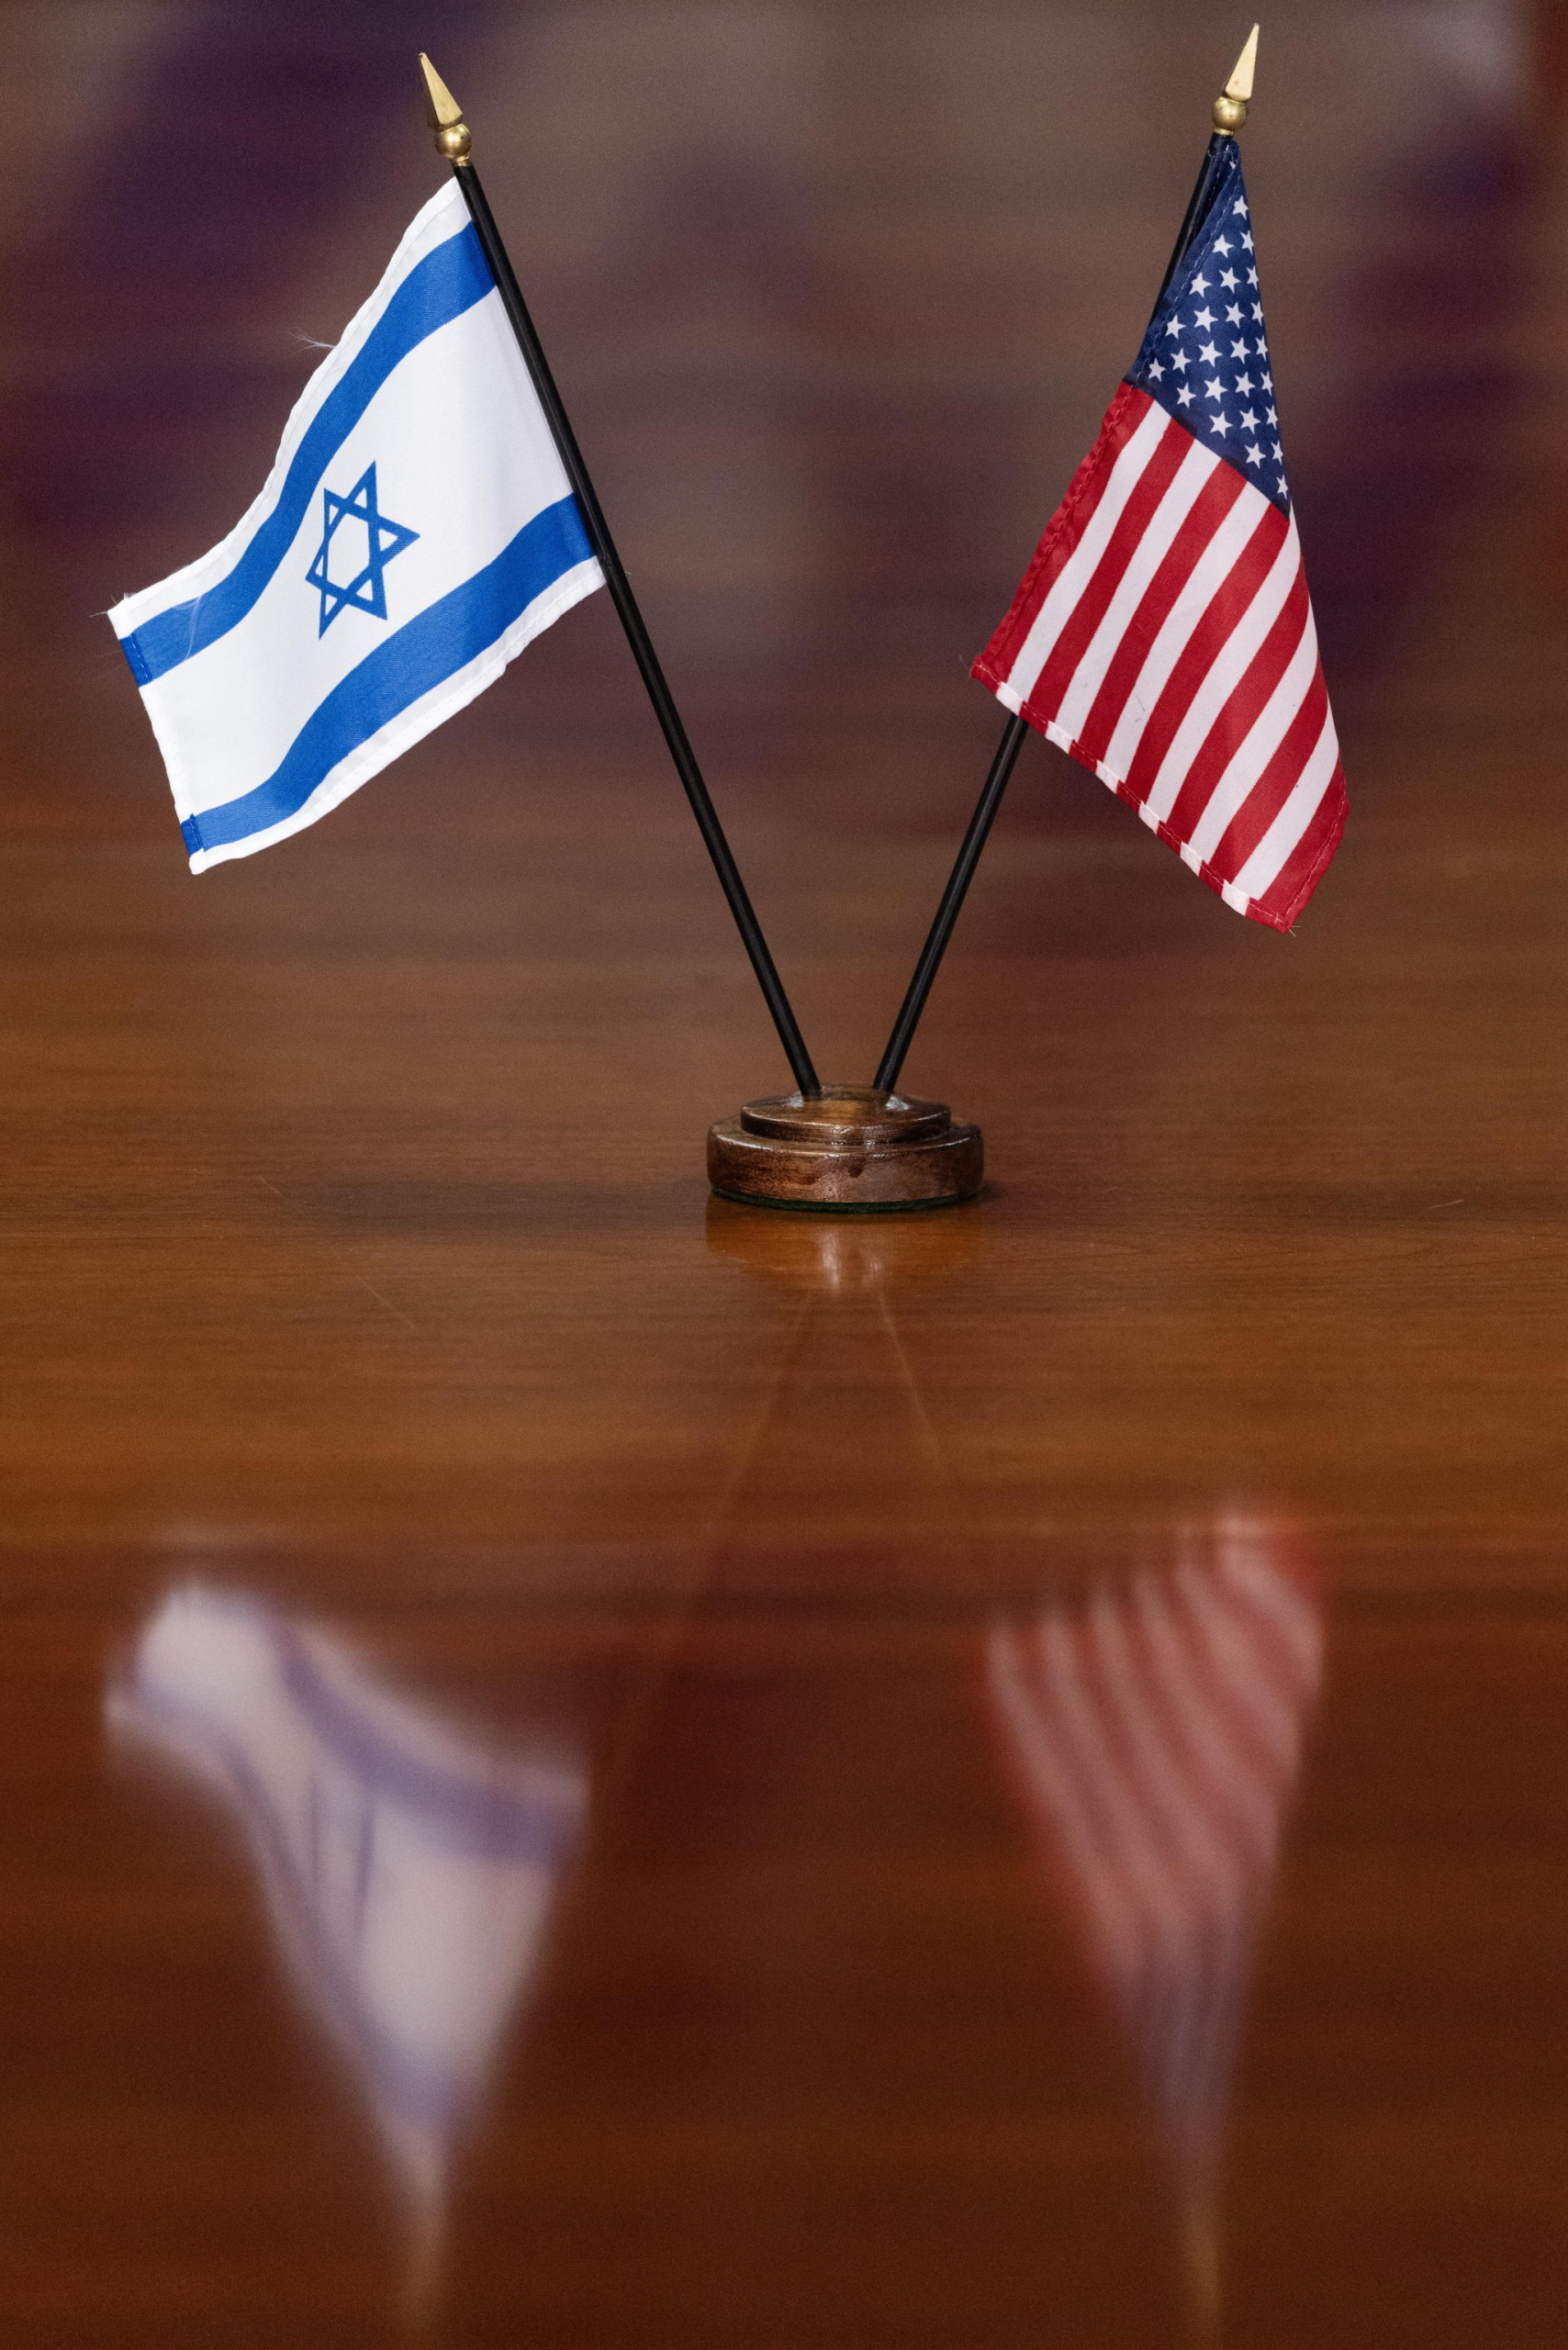 epa11244711 The national flags of Israel and the United States are placed on a table during a meeting between Israeli Defense Minister Yoav Gallant and US Secretary of Defense Lloyd Austin at the Pentagon in Arlington, Virginia, USA, 26 March 2024. Gallant's visit to the US capital comes amid high tensions between the US administration and Israel. Israeli President Netanyahu cancelled an Israeli delegation's visit to Washington in response to the US abstaining from a United Nations Security Council vote on a ceasefire in Gaza proposal.  EPA/MICHAEL REYNOLDS